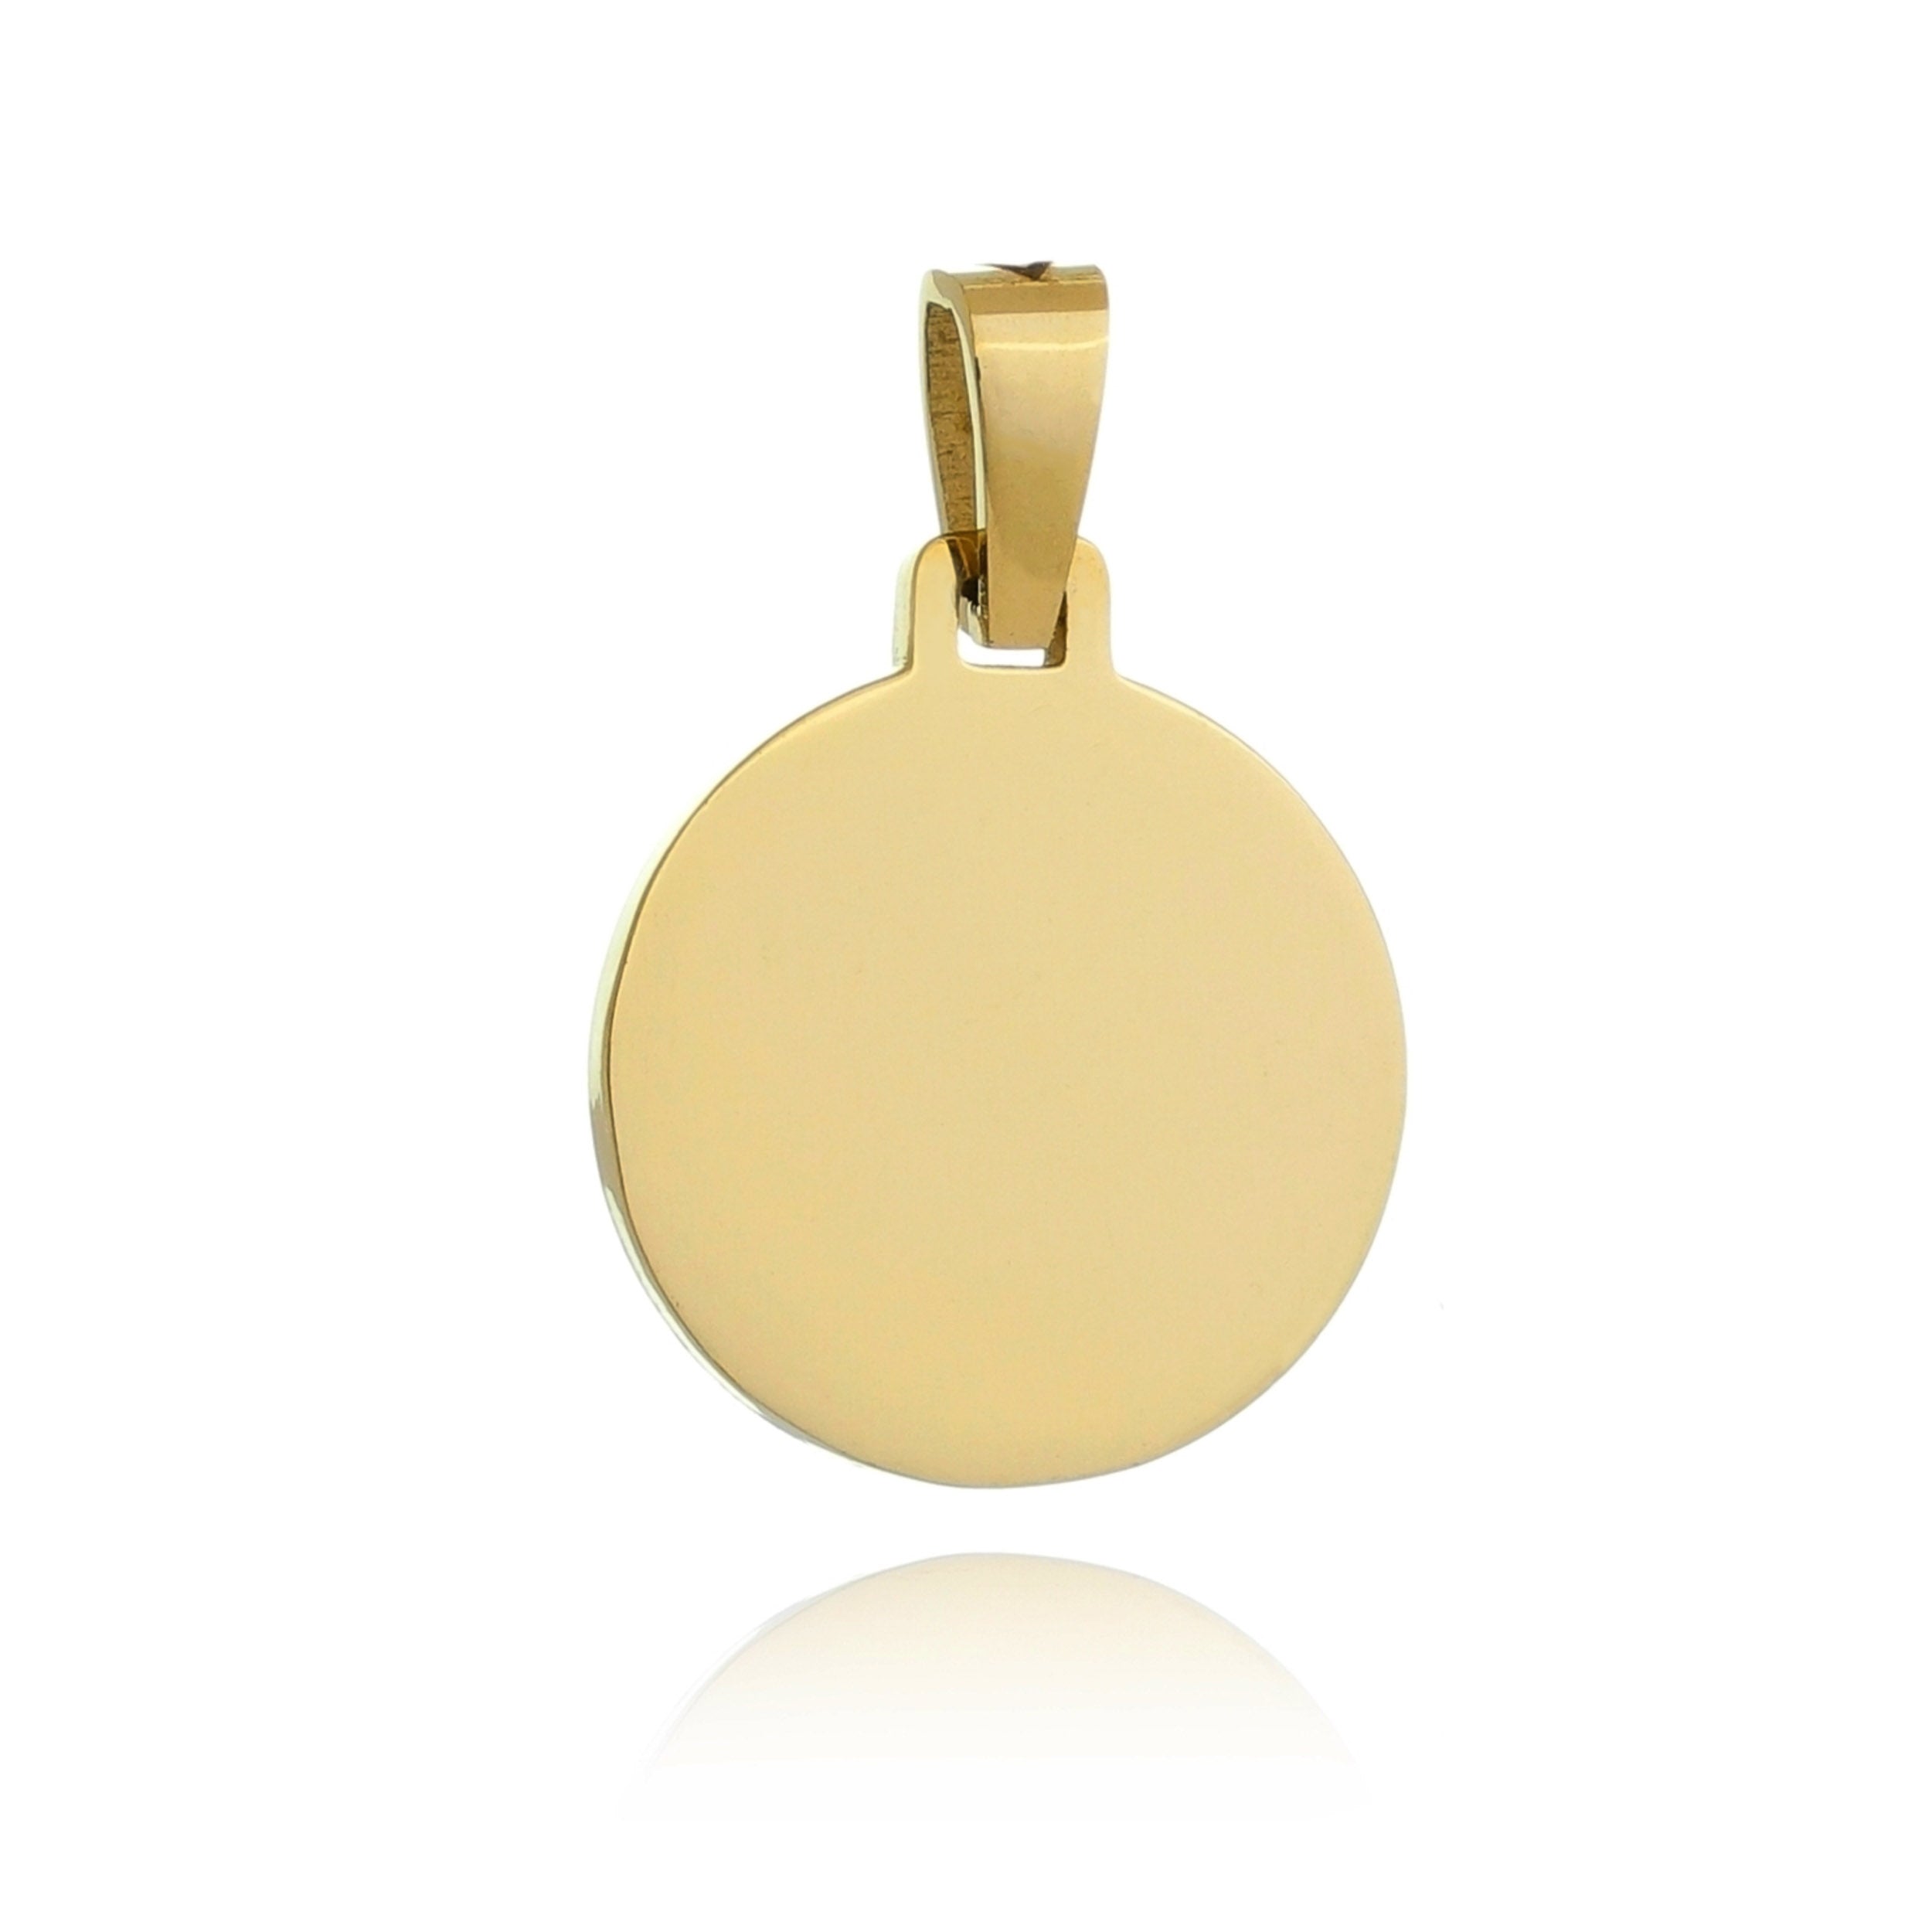 Engravable Round Pendent - Premium. We offer in 18k Gold and Stainless Steel.